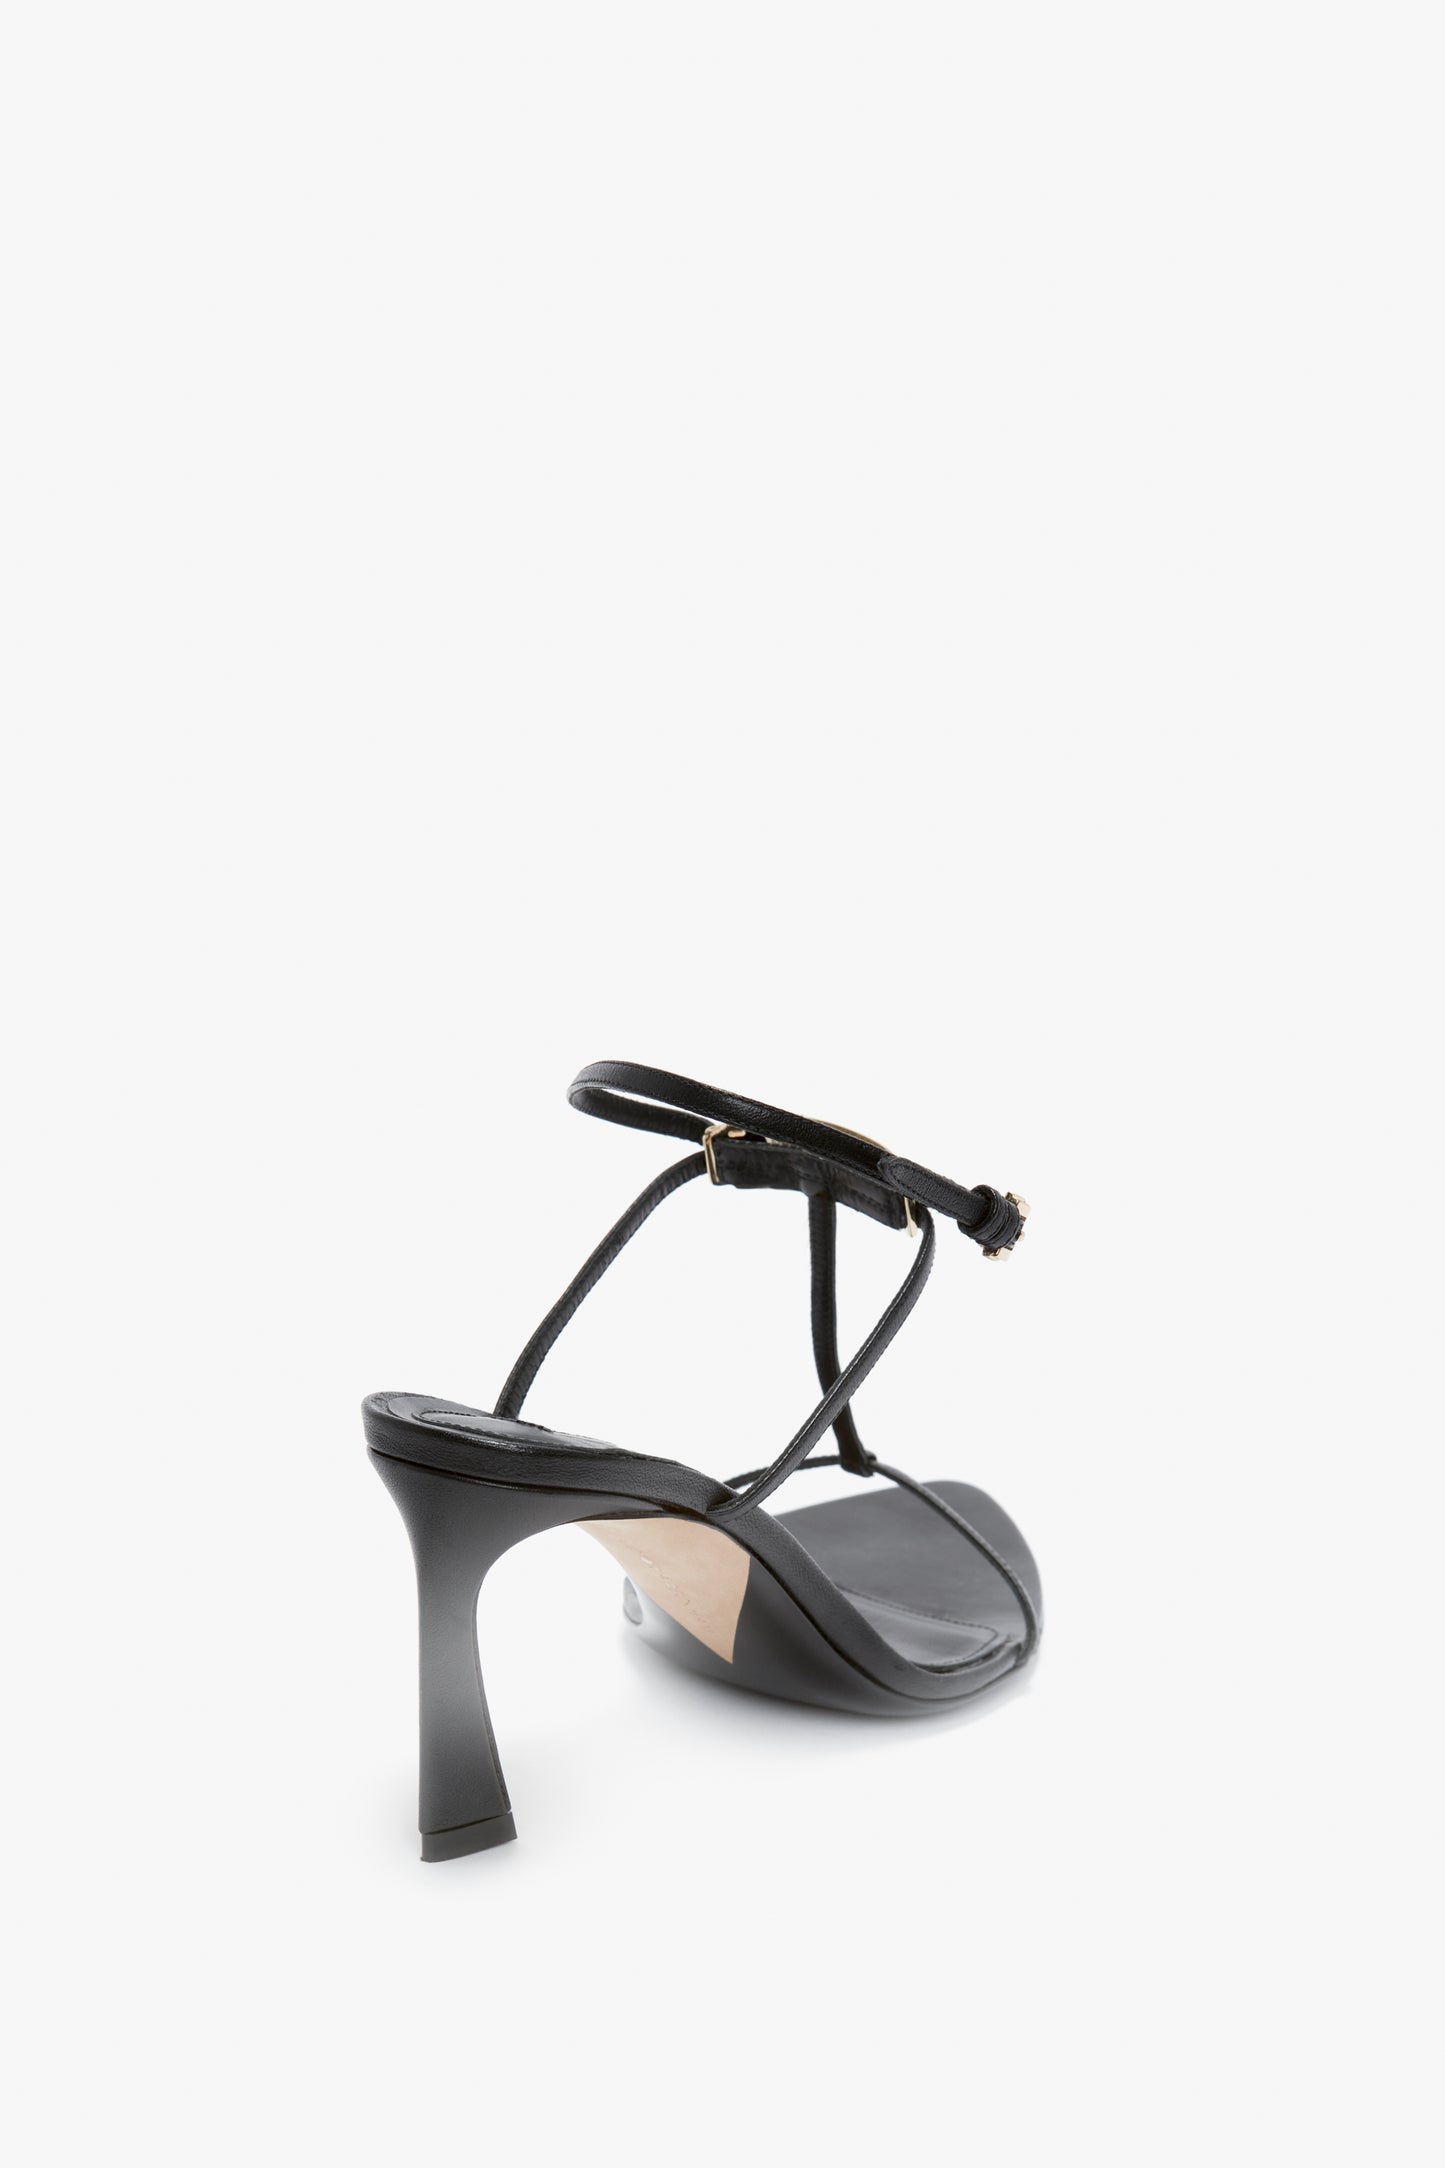 A Victoria Beckham Frame Detail Sandal In Black Leather with thin straps, a sculptural heel, and an adjustable ankle strap, viewed from the back and slightly to the side against a white background.